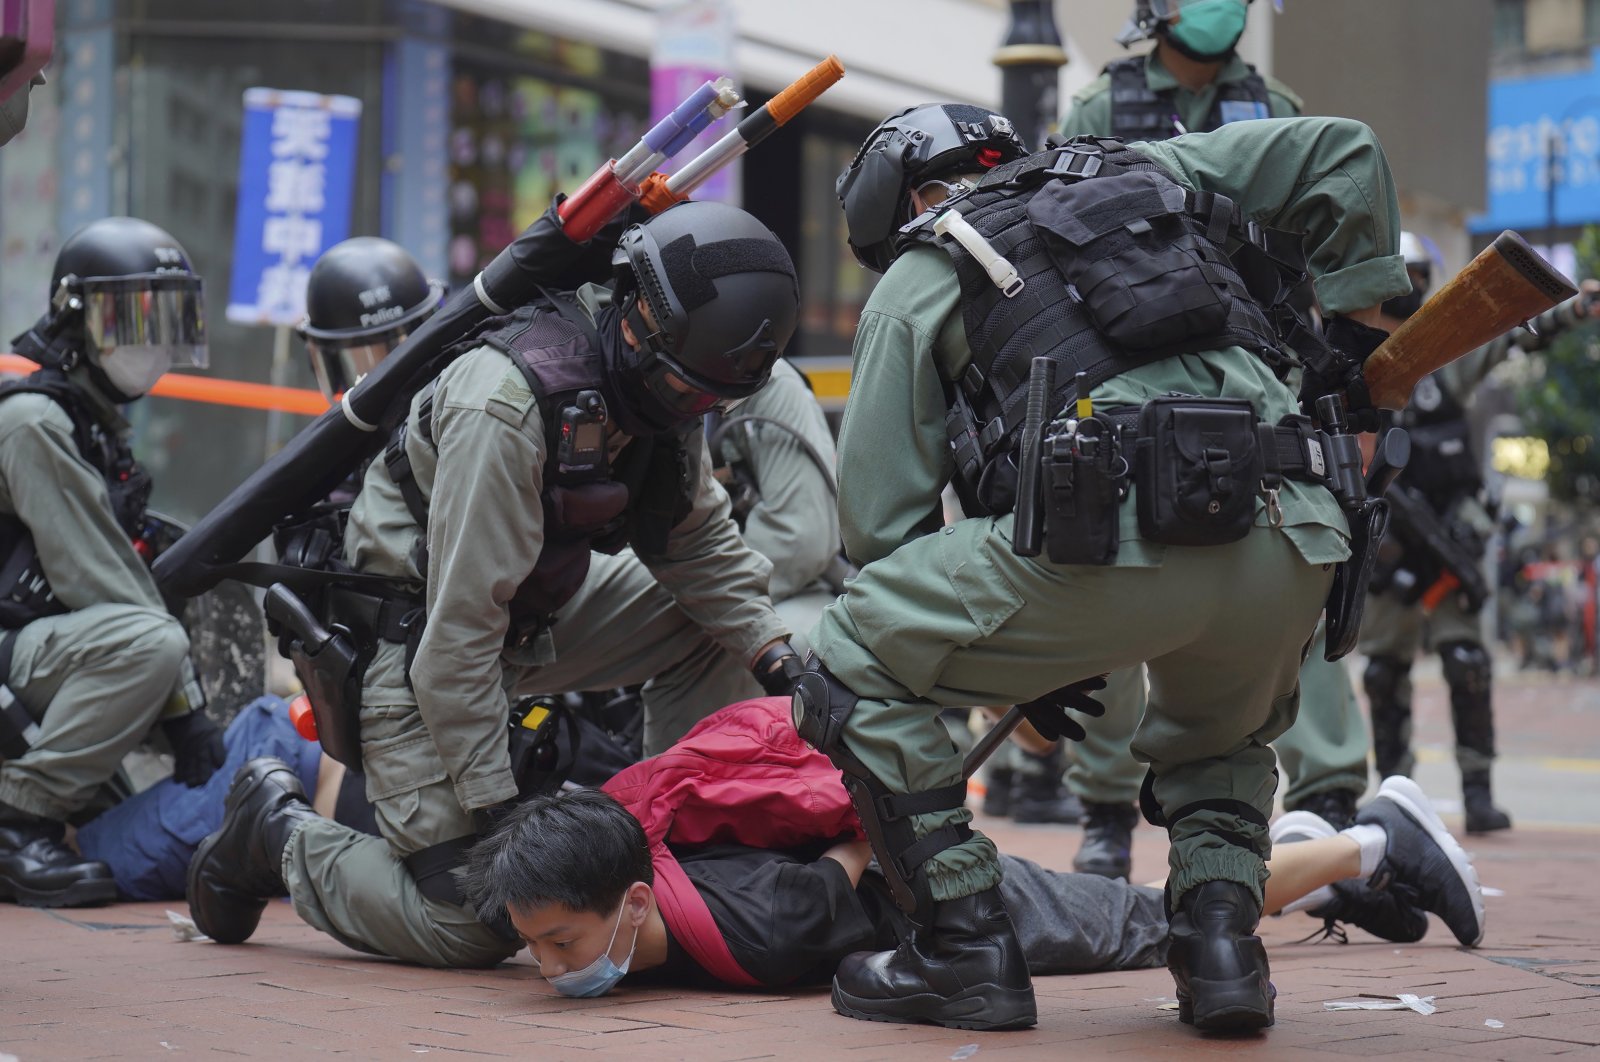 Riot police detain a protester during a demonstration against Beijing's national security legislation in Causeway Bay in Hong Kong, Sunday, May 24, 2020. (AP Photo)